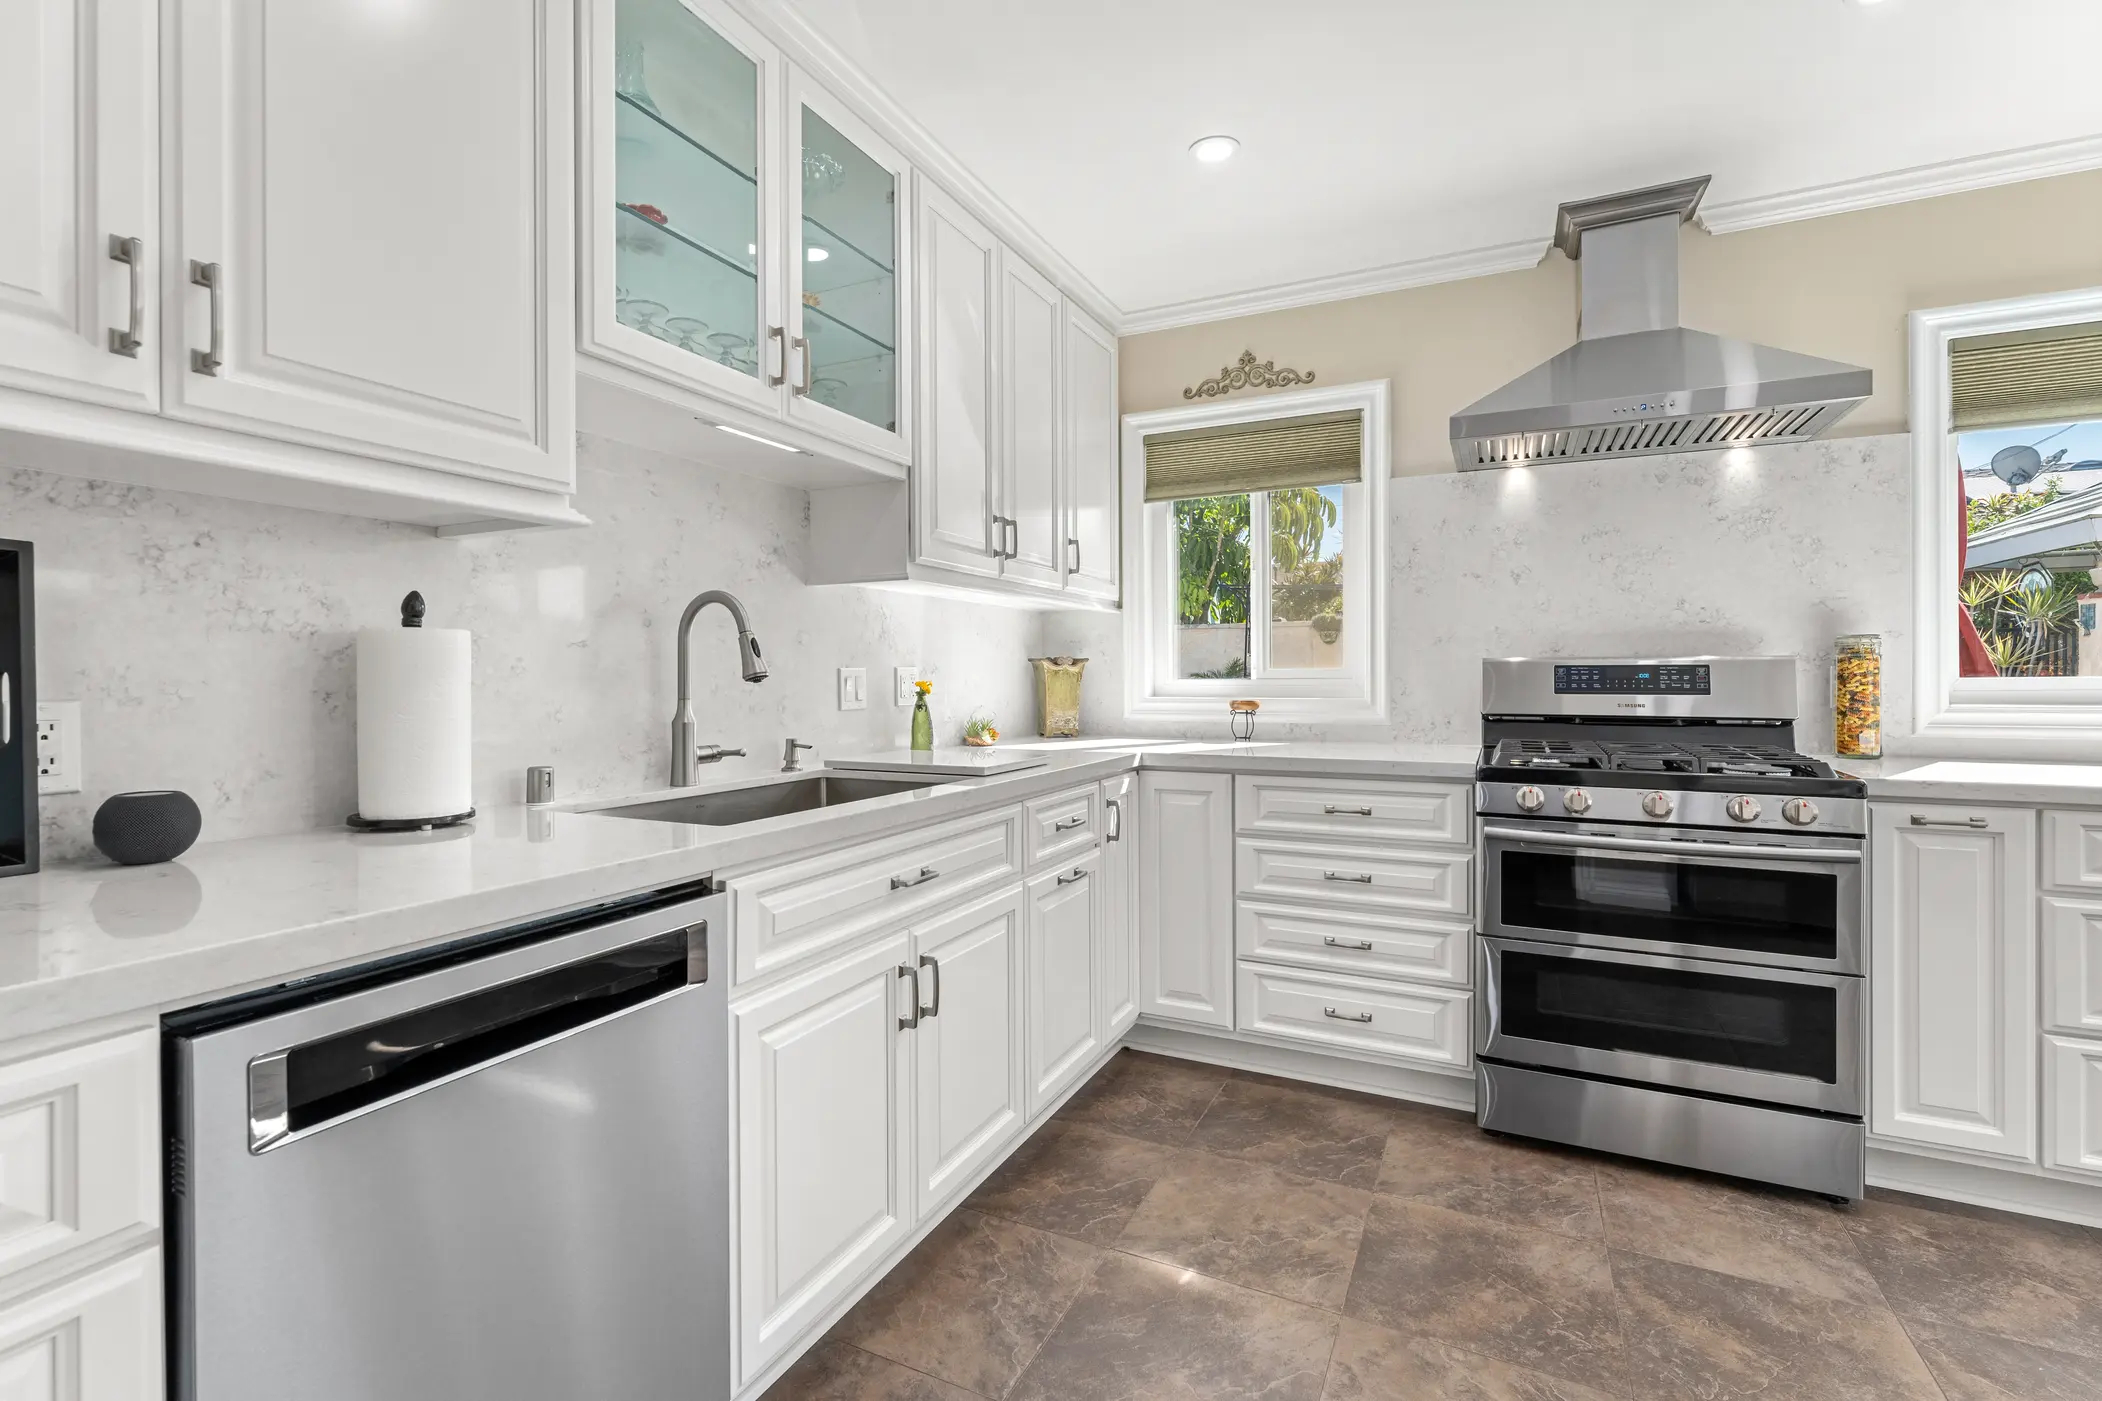 Is White Still a Popular Choice for Kitchen Cabinets?